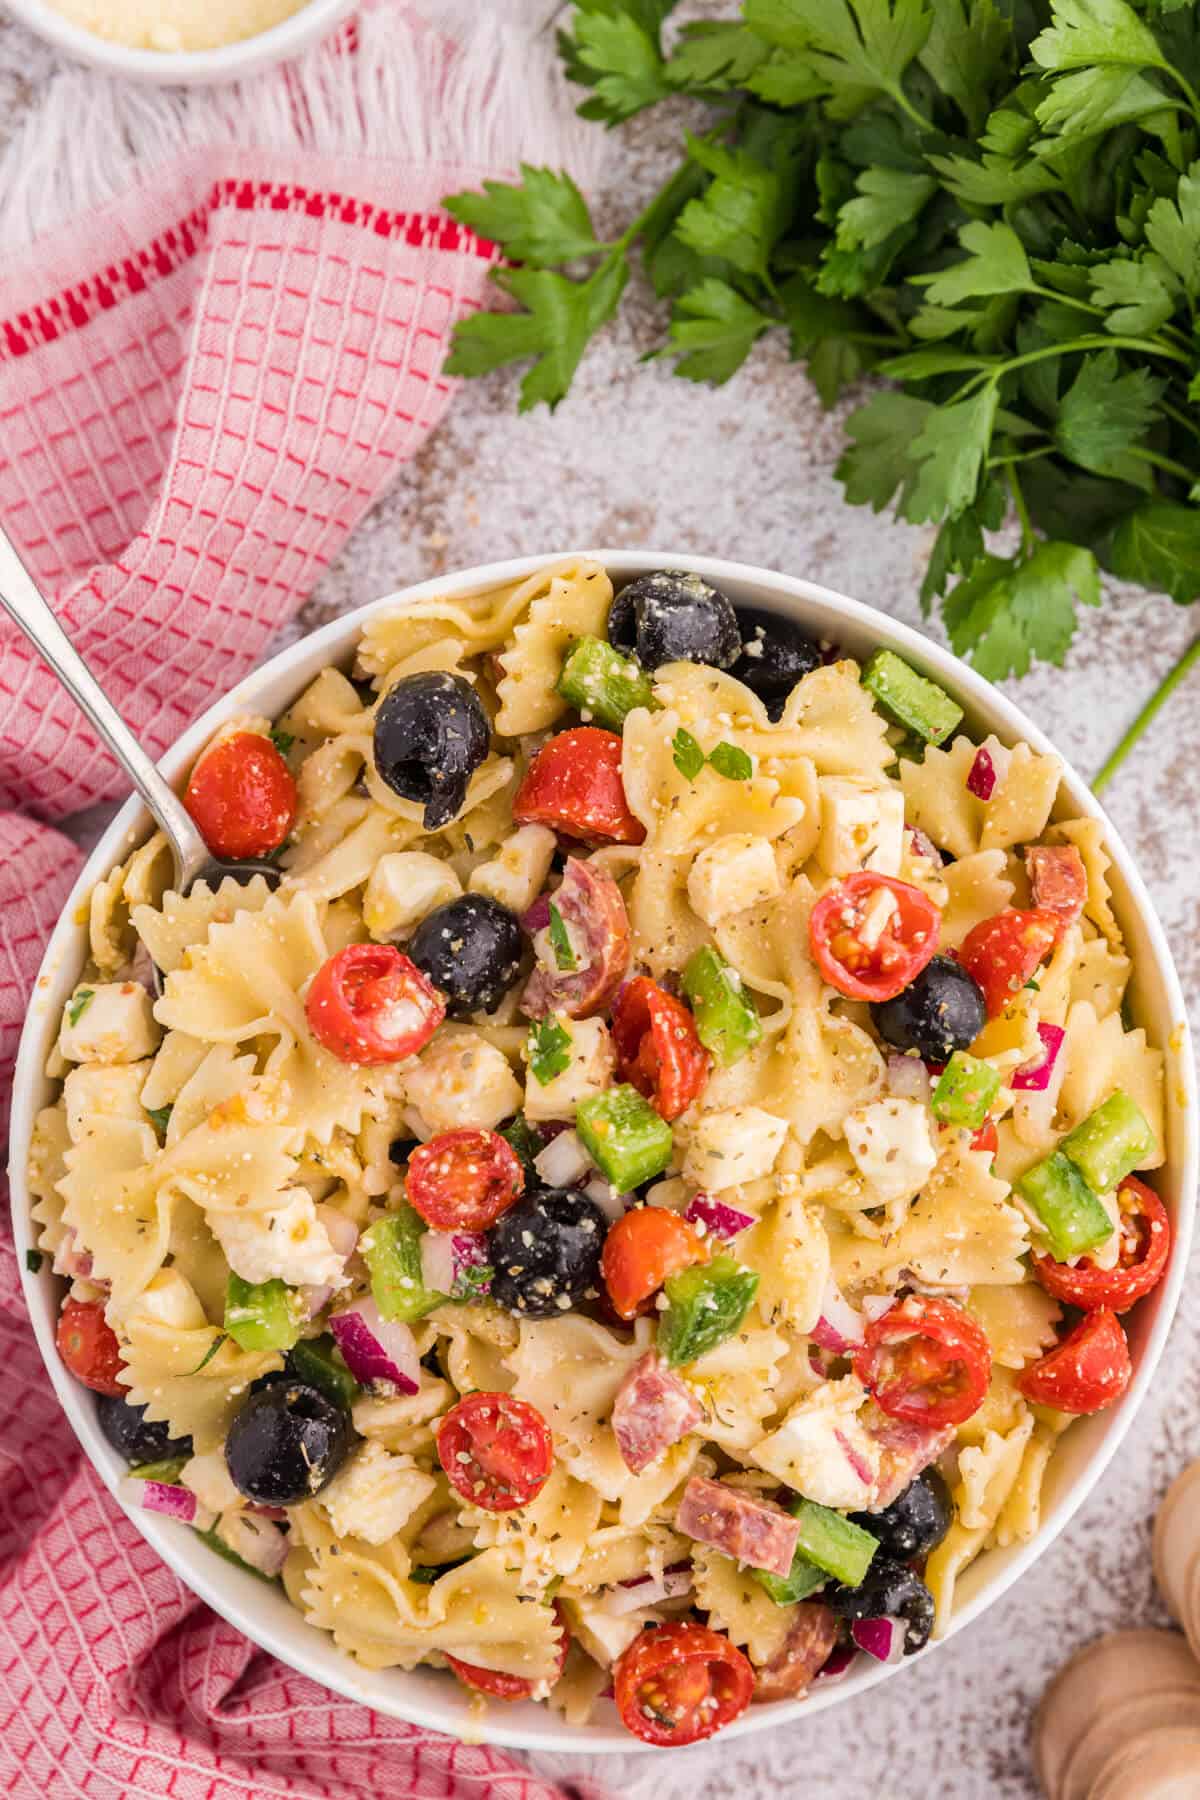 Italian pasta salad in a bowl with a spoon.